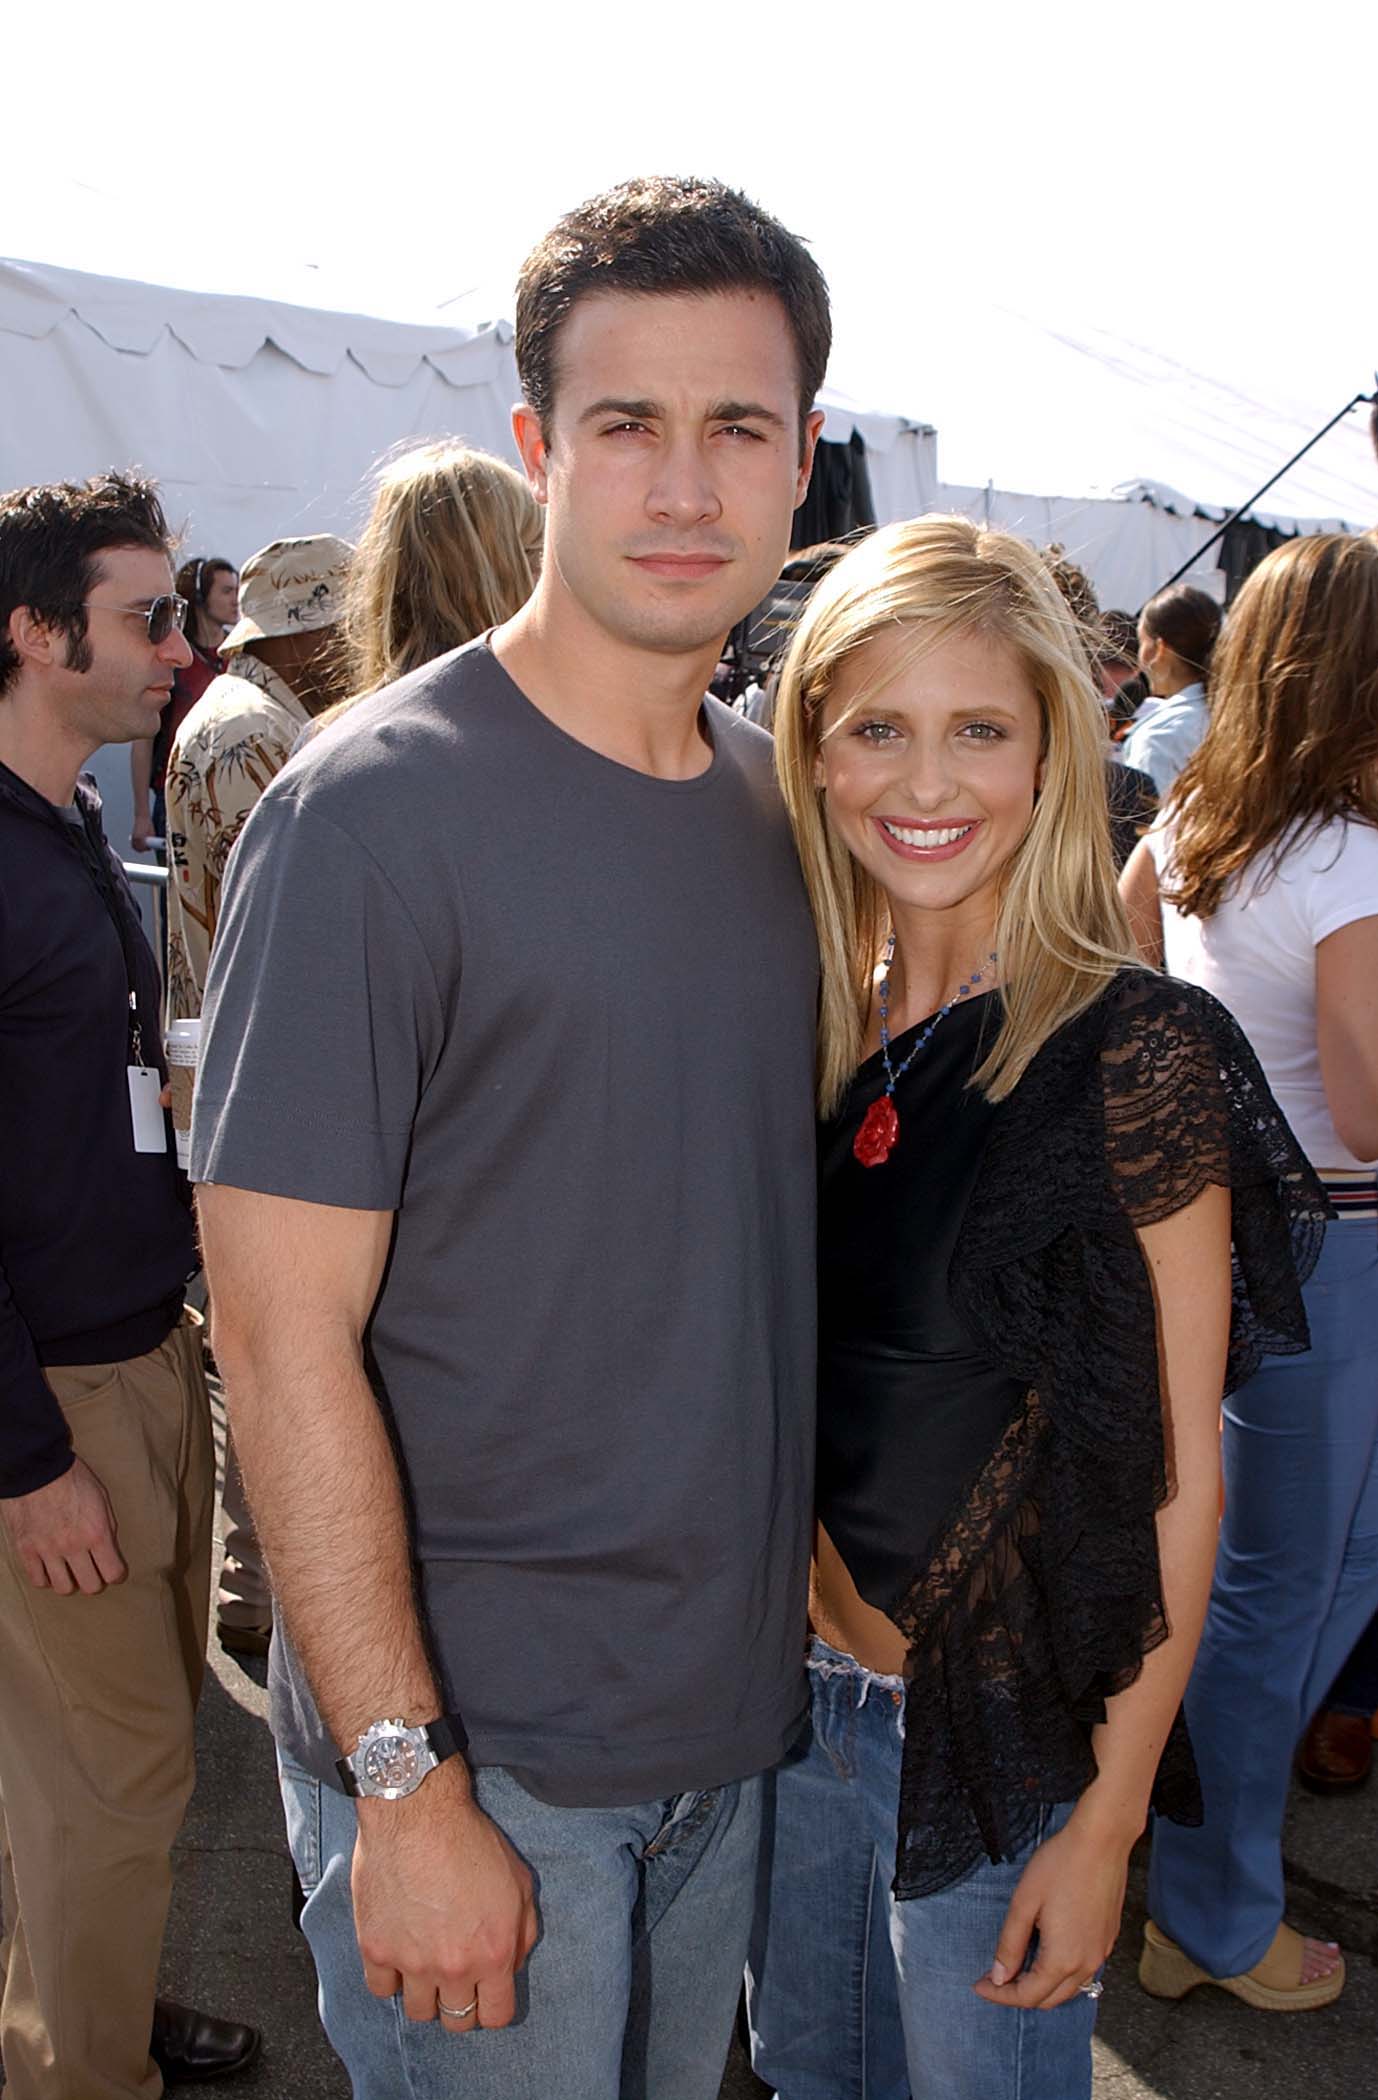 Actor Freddie Prinze Jr. and actress Sarah Michelle Gellar during Kid's Choice Awards on April 20, 2002 in Santa Monica, California ┃Source:  Getty Images